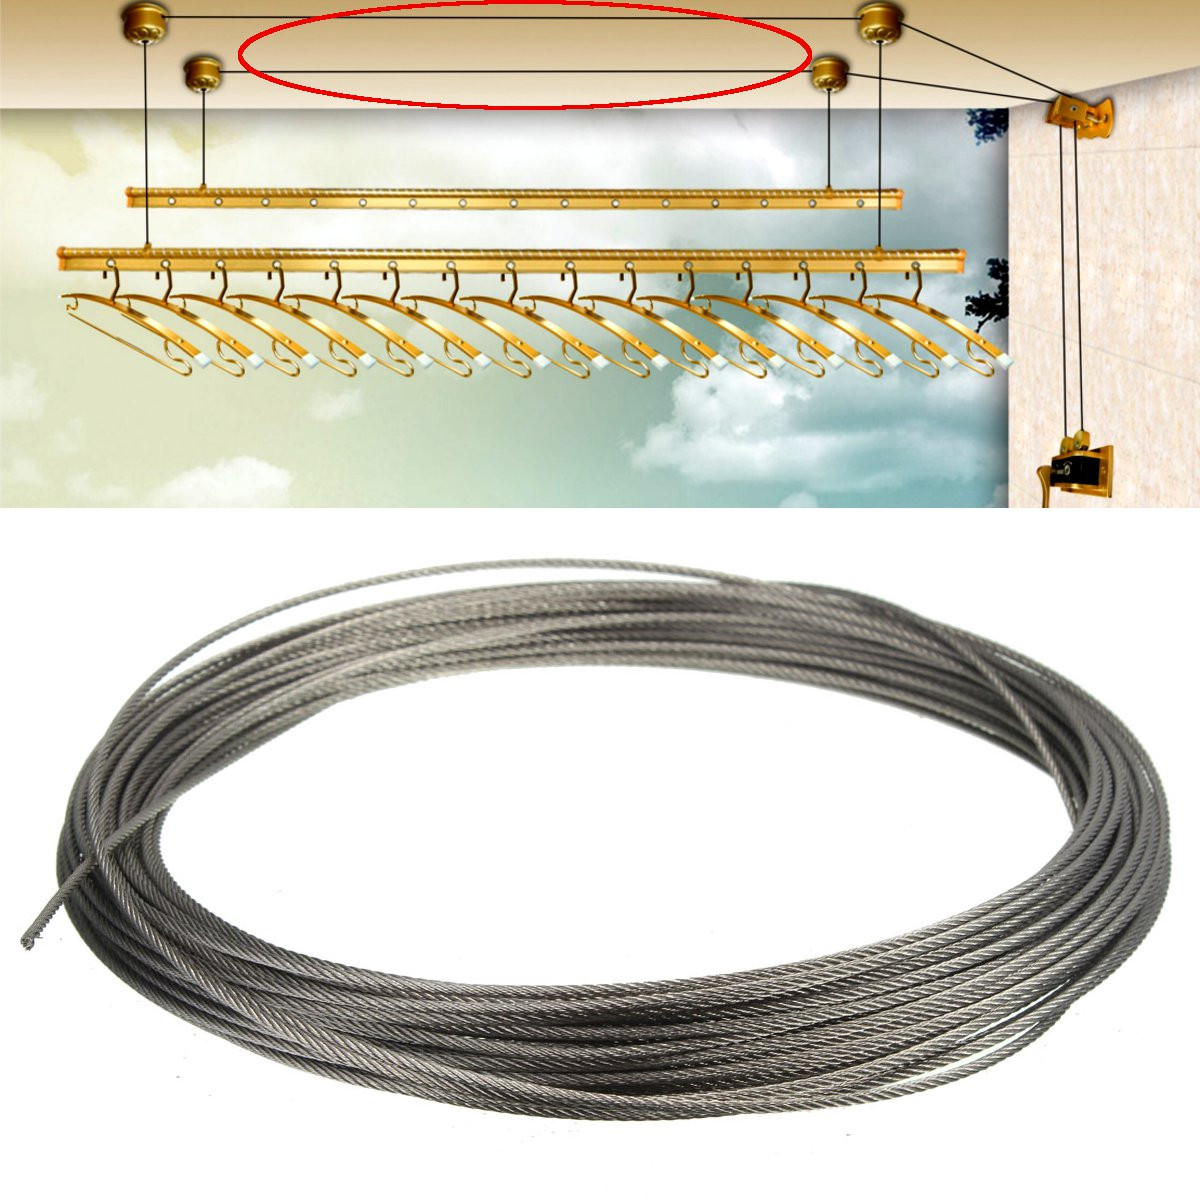 15M-316-Stainless-Steel-Clothes-Cable-Line-Wire-Rope-1035887-8